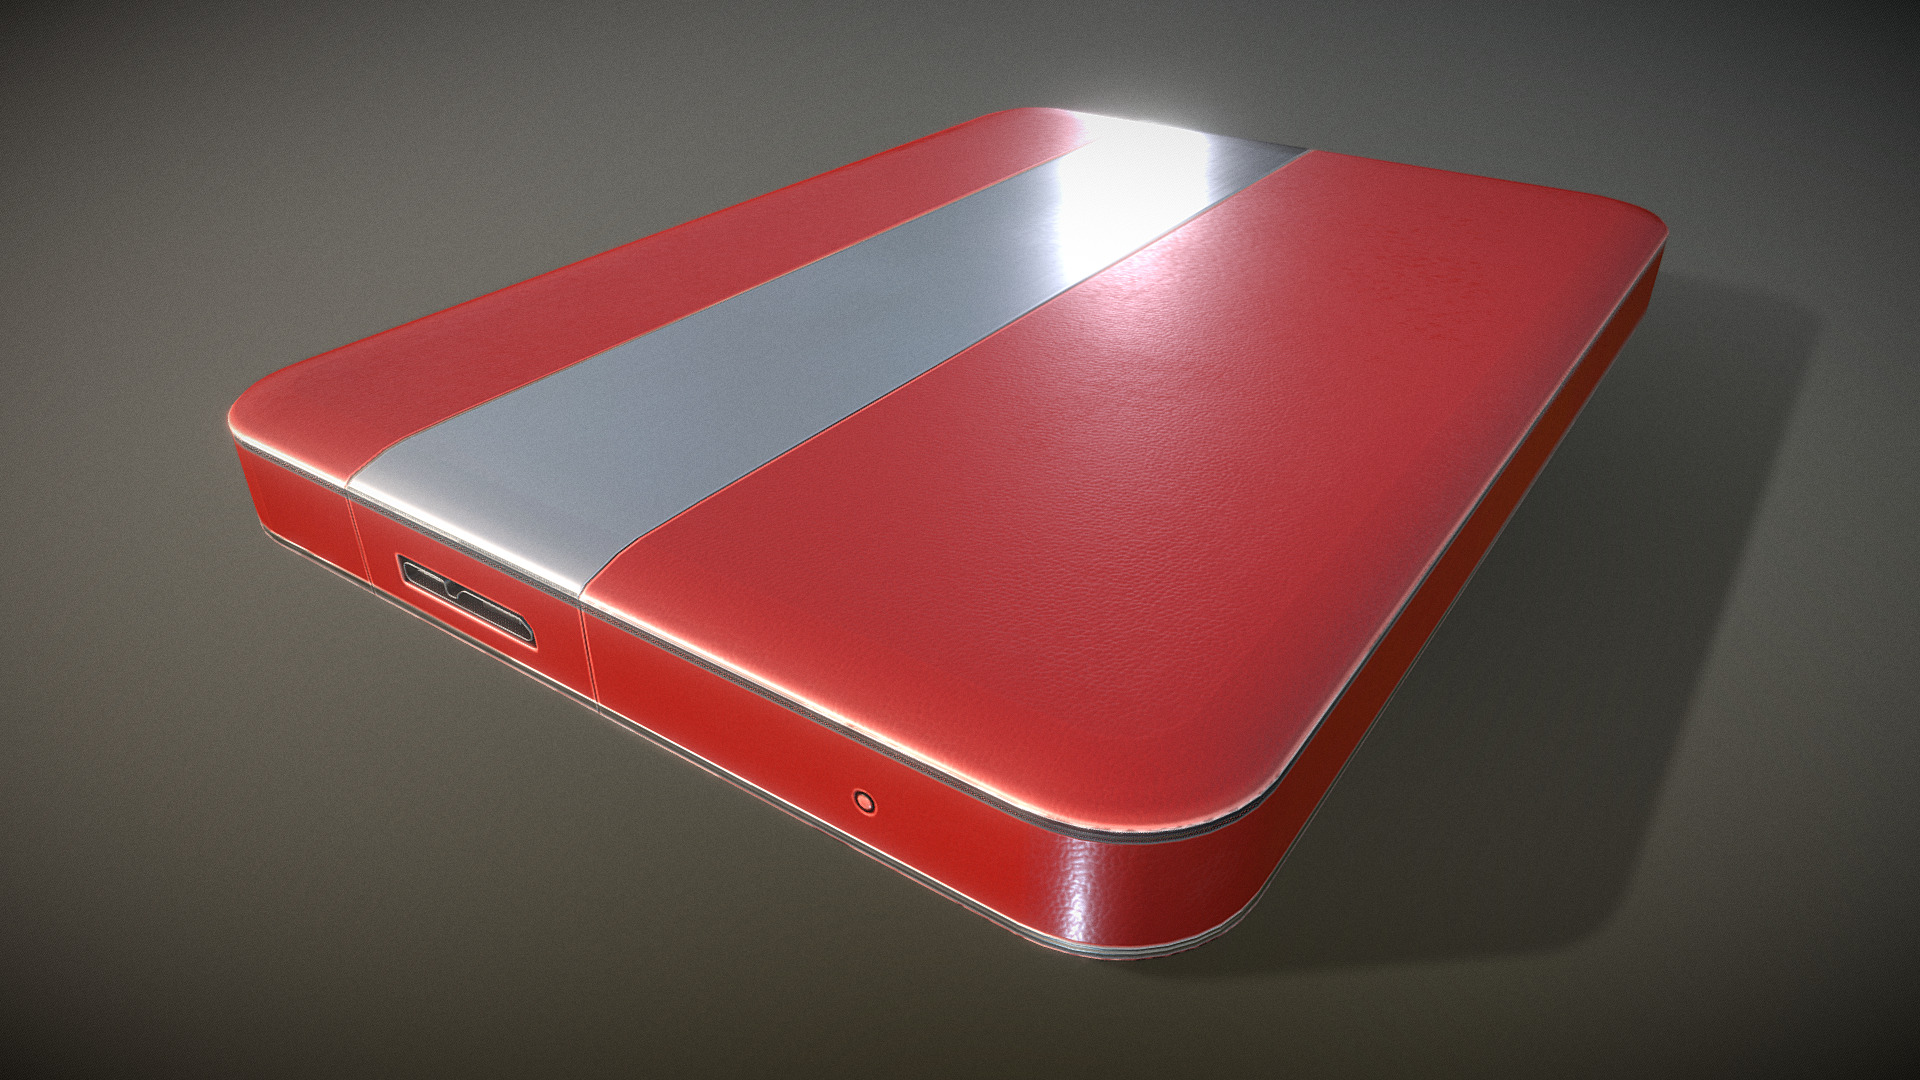 3D model External Hard Drive Red Leathe Version - This is a 3D model of the External Hard Drive Red Leathe Version. The 3D model is about a red and white cell phone.